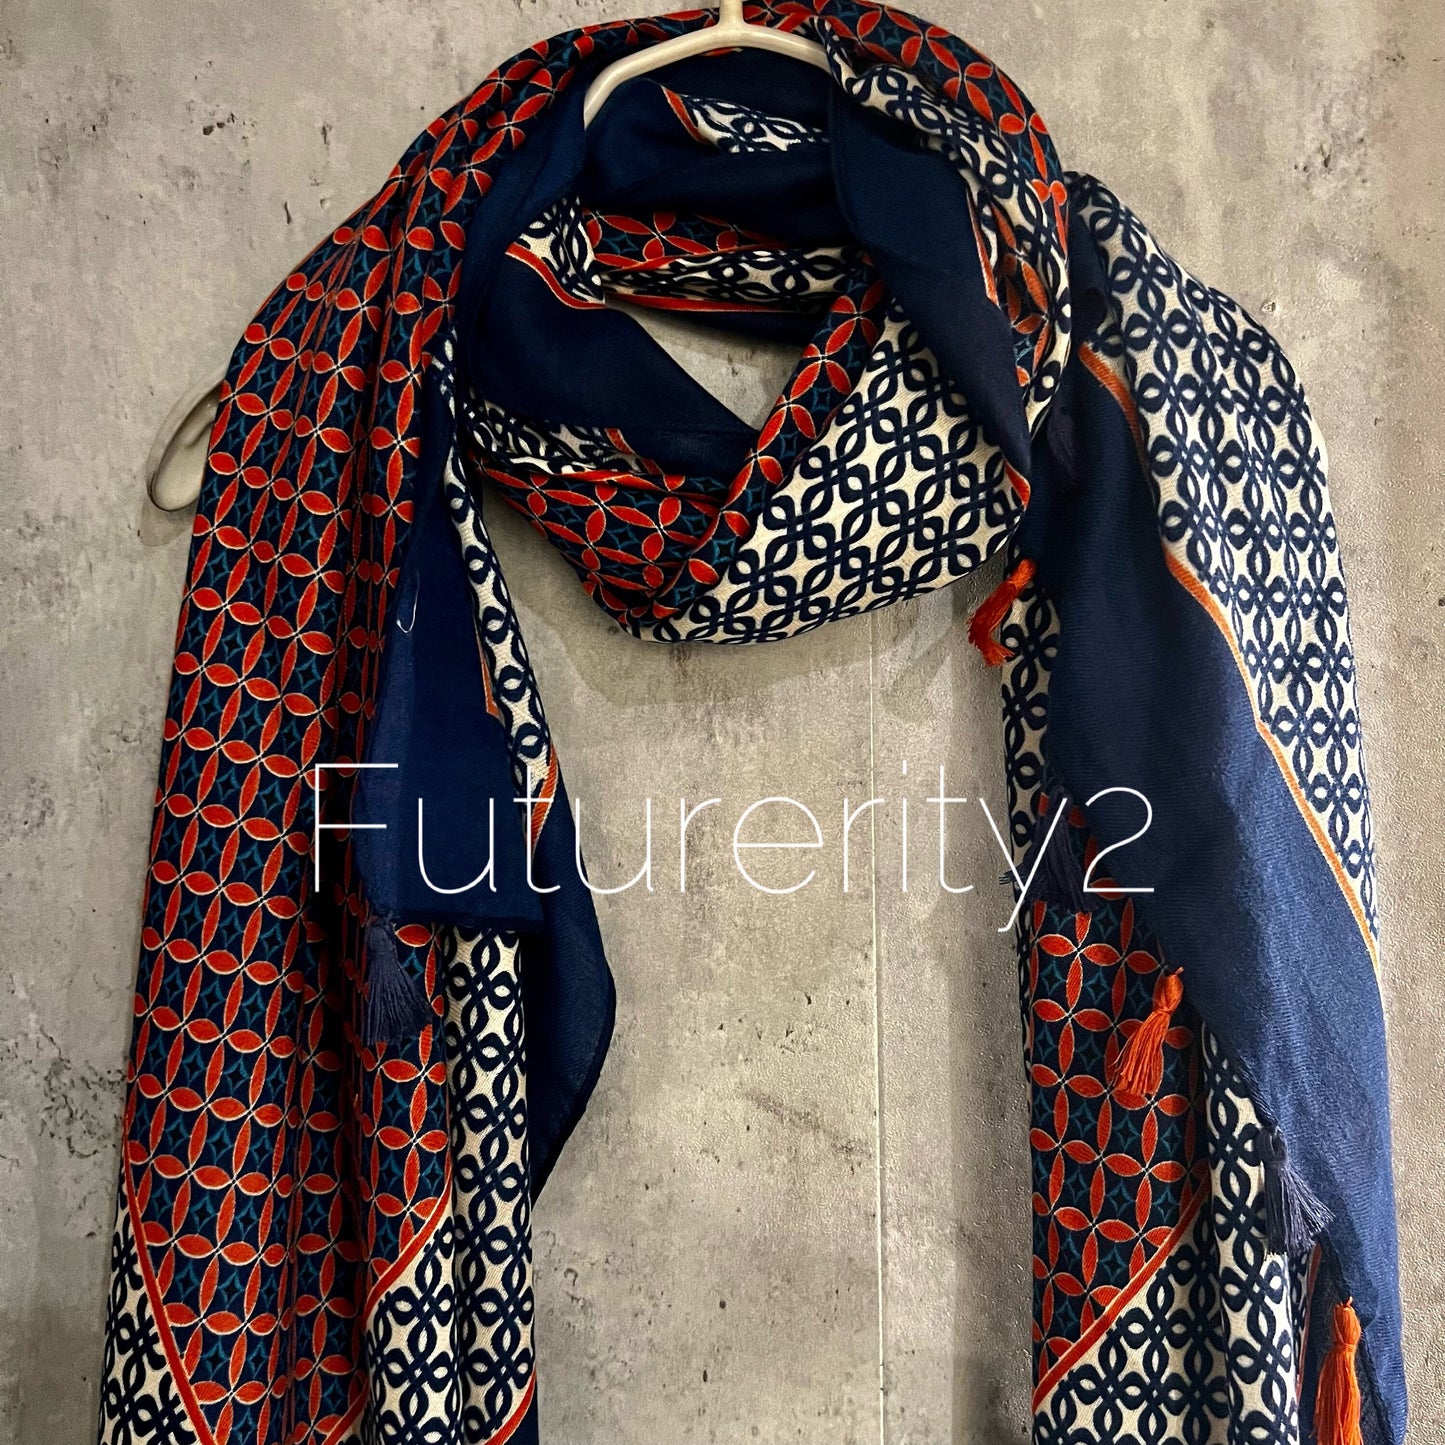 Seamless Tiles Pattern With Tassel Blue Cotton Scarf/Summer Autumn Winter Scarf/Gift For Mum/Scarf Women/Gift Birthday Christmas/UK Seller